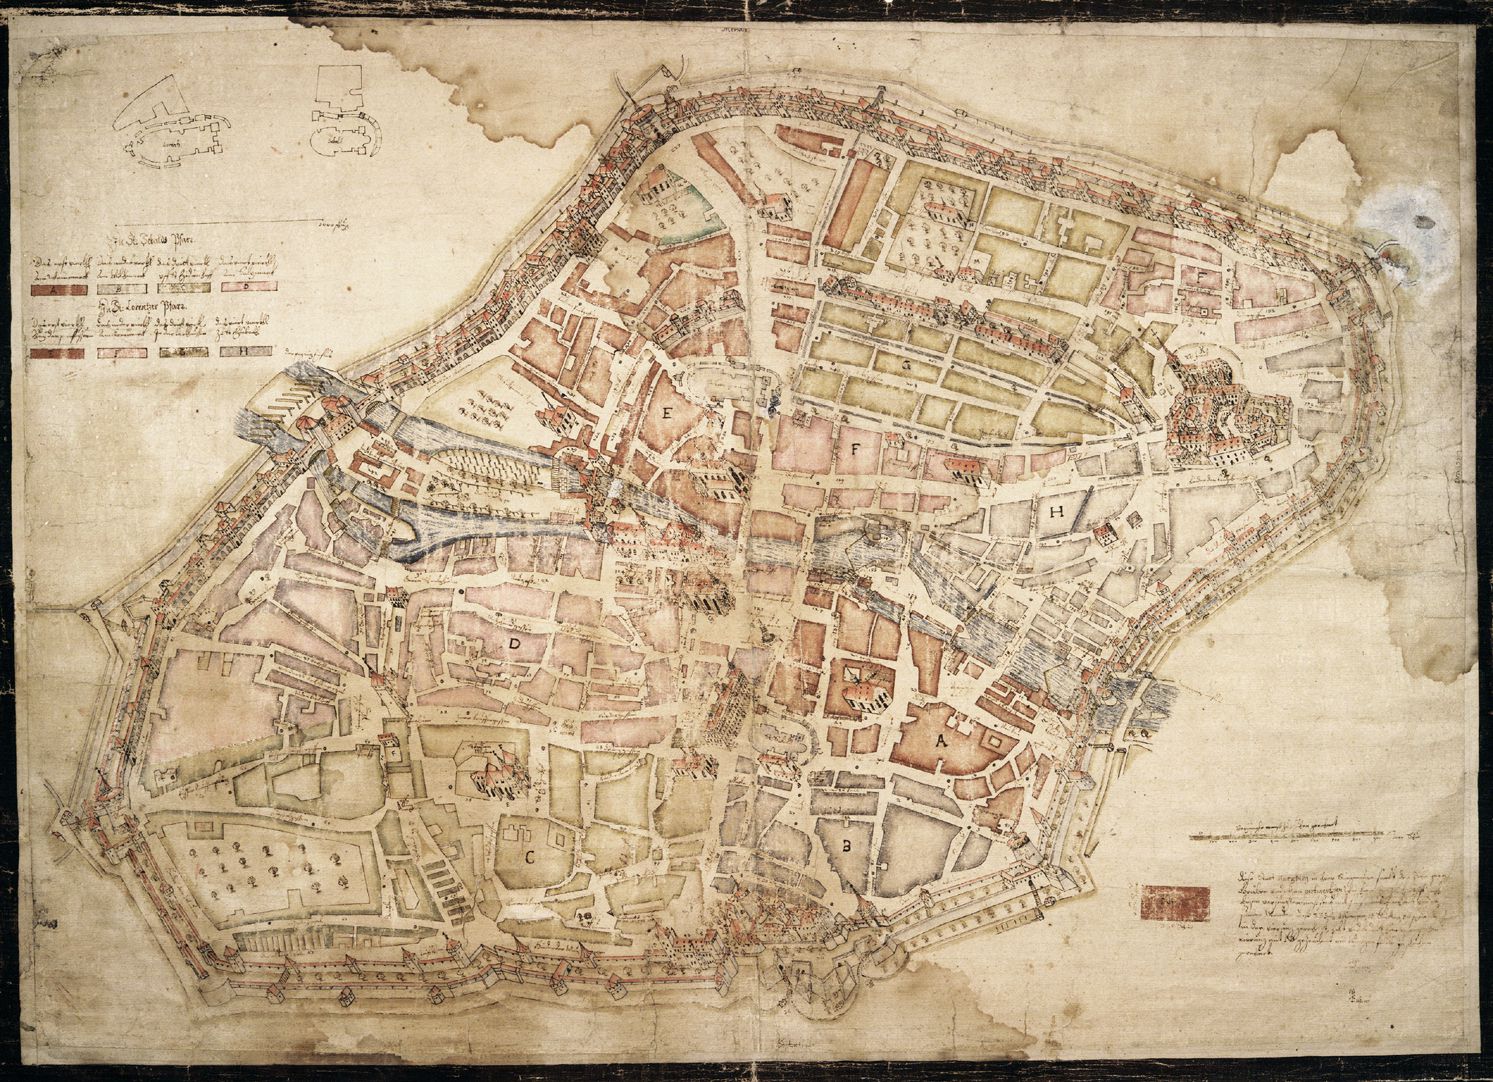 This City of Nuremberg within its enclosing walls… General view: The city ground plan was tilted to the left, i.e. the steep top view is shown as seen from the north-west, this way an oblique axonometry was created